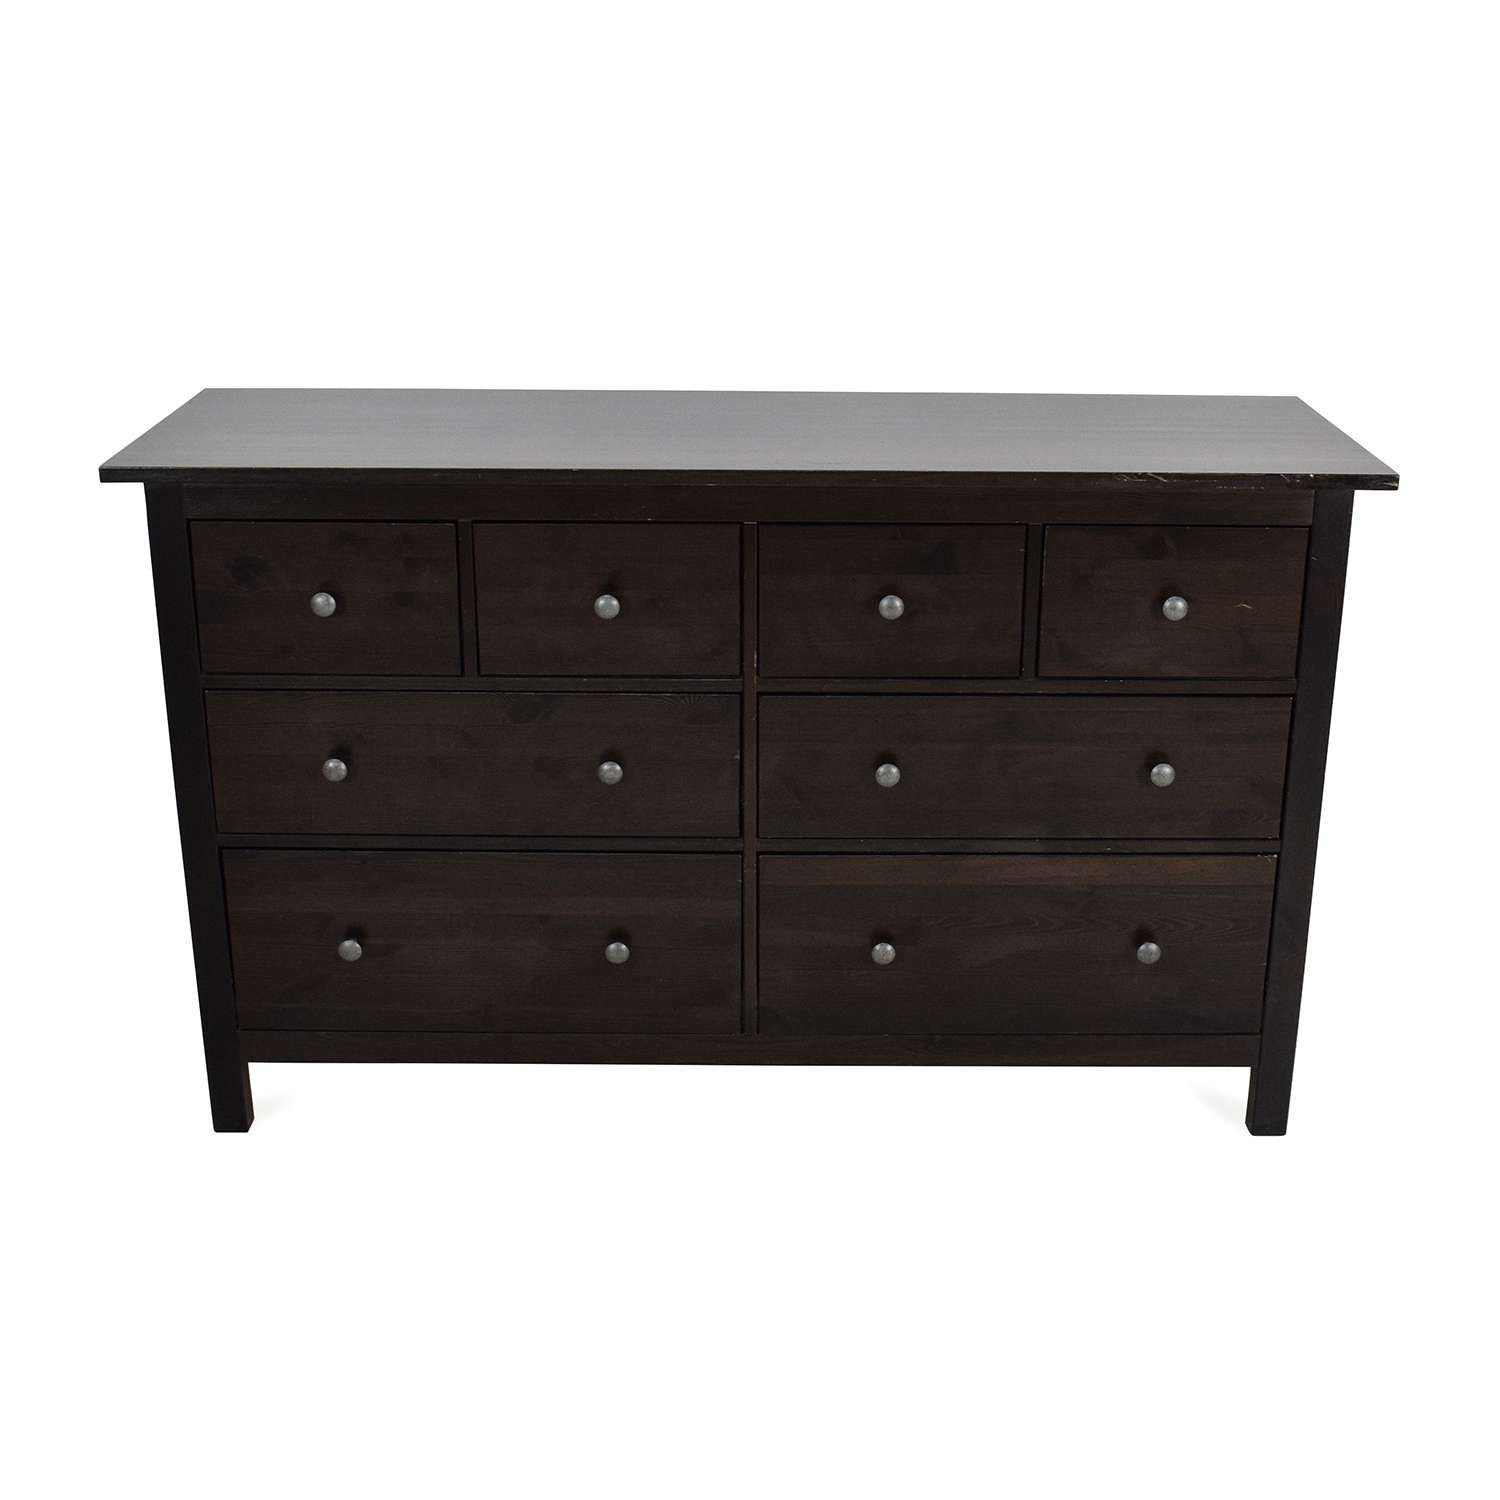 62% Off – Ikea Ikea Hemnes Dresser / Storage Within Second Hand Dressers And Sideboards (View 13 of 20)